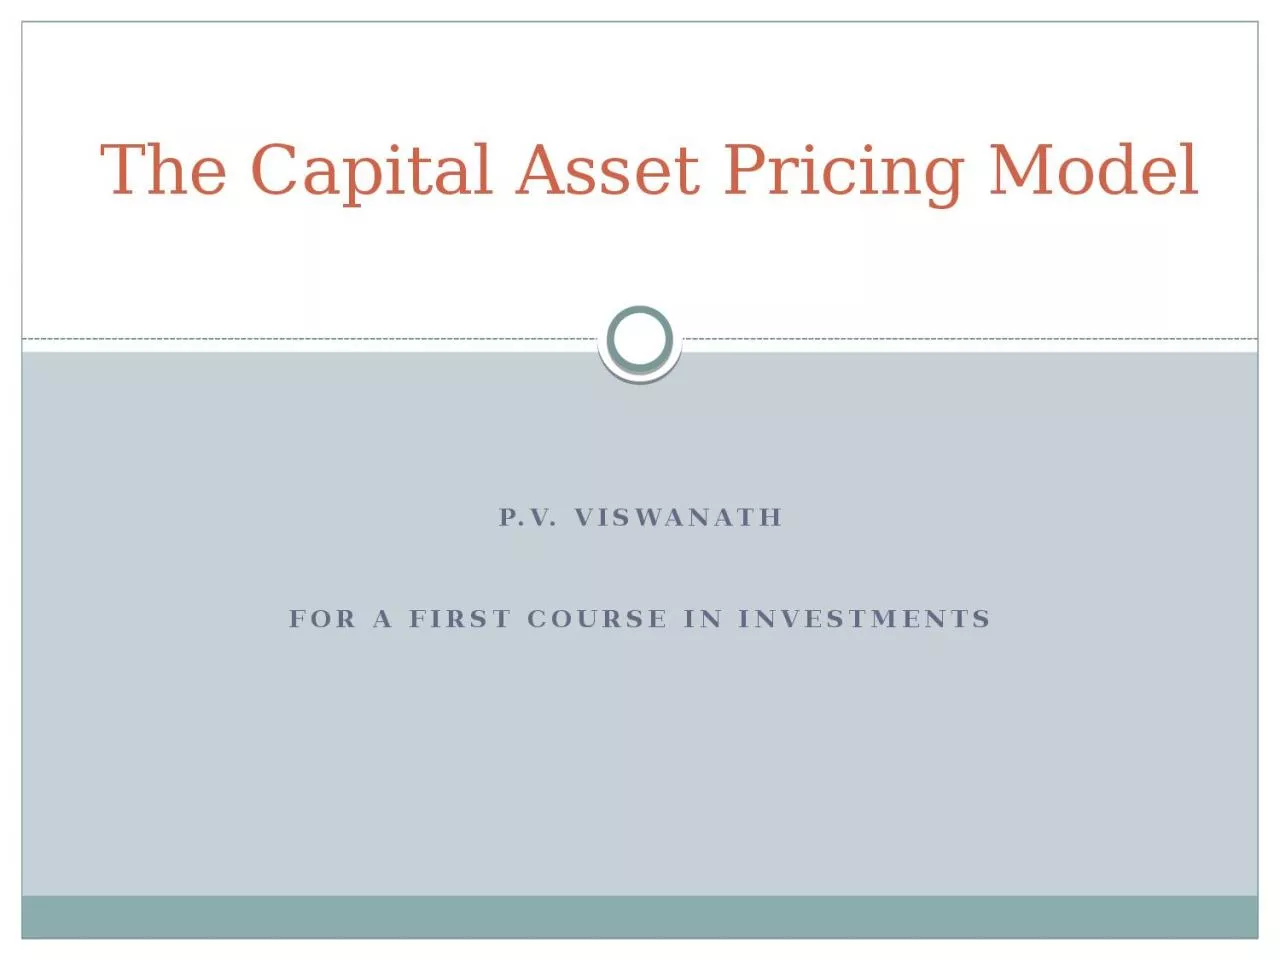 The Capital Asset Pricing Model